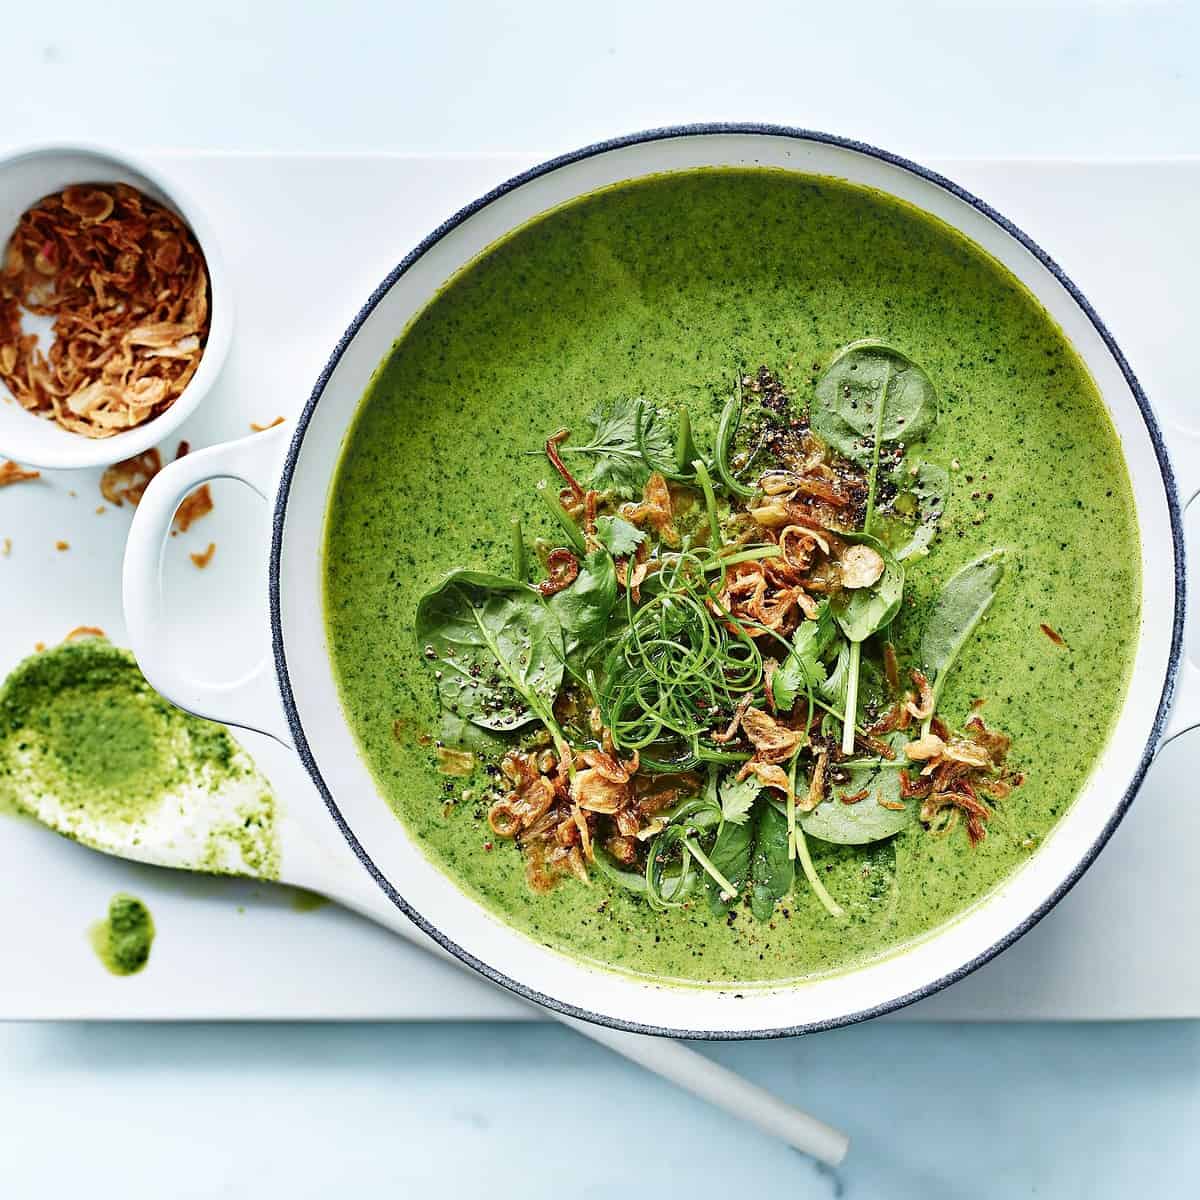  A vegan soup that everyone will love, even meat-eaters.